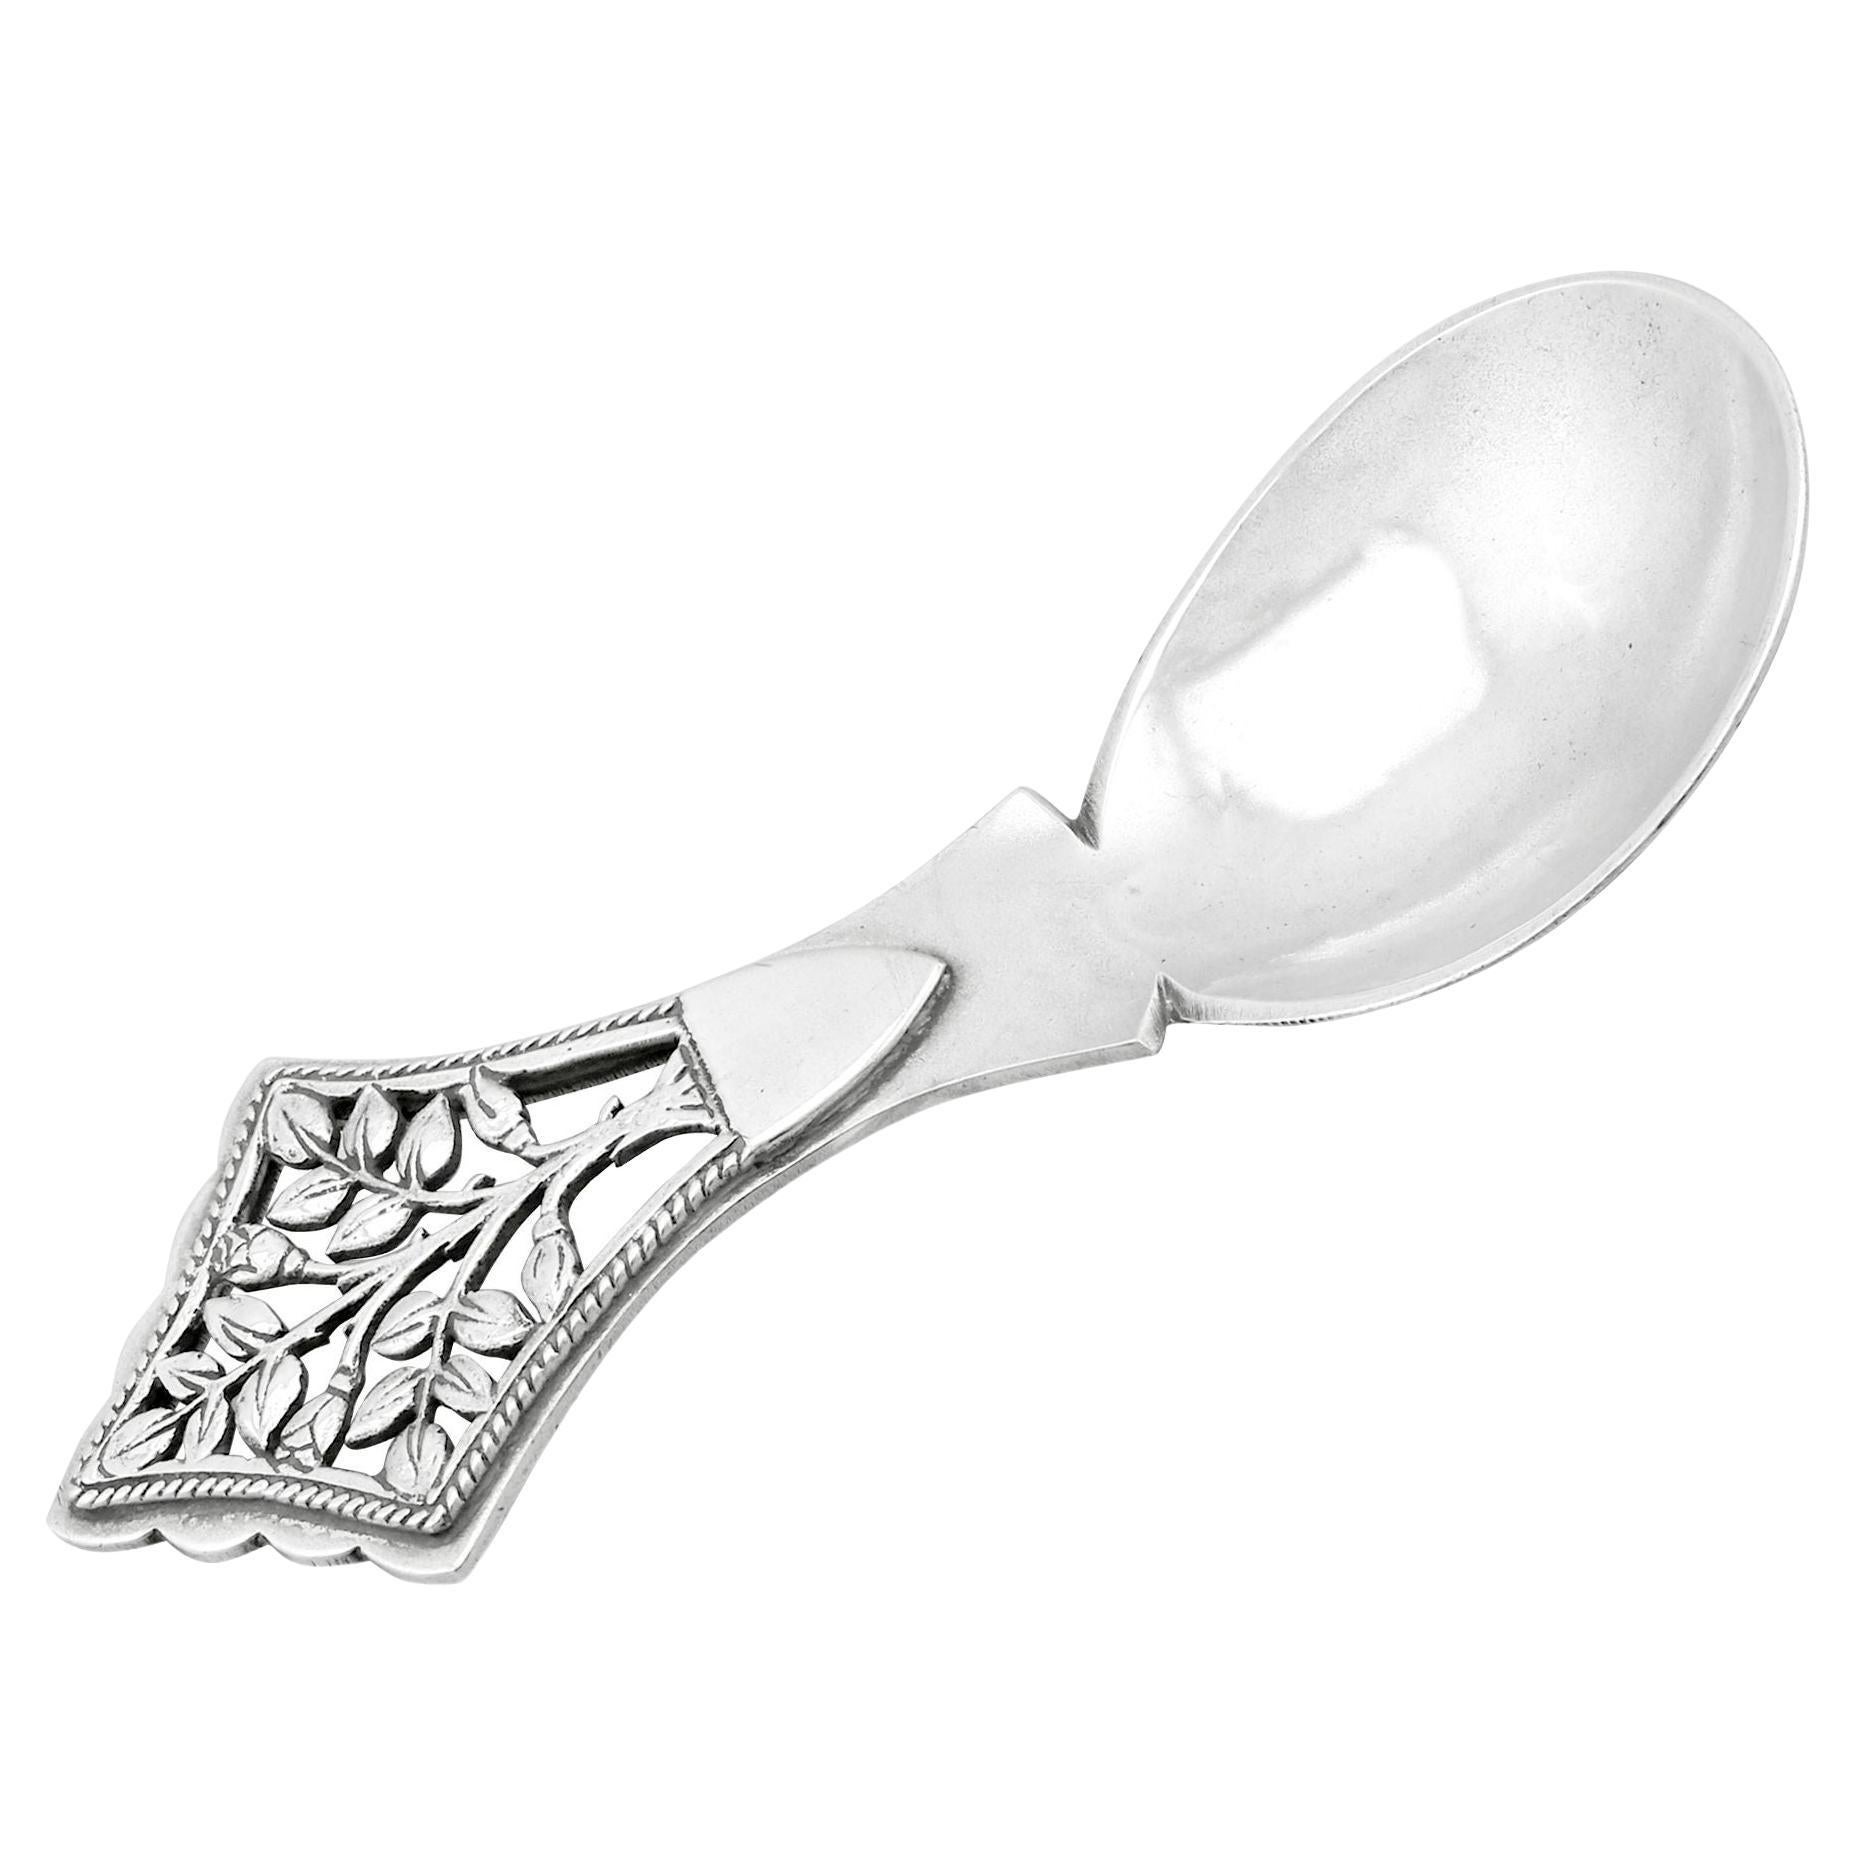 1929 Antique Sterling Silver Caddy Spoon by Henry George Murphy